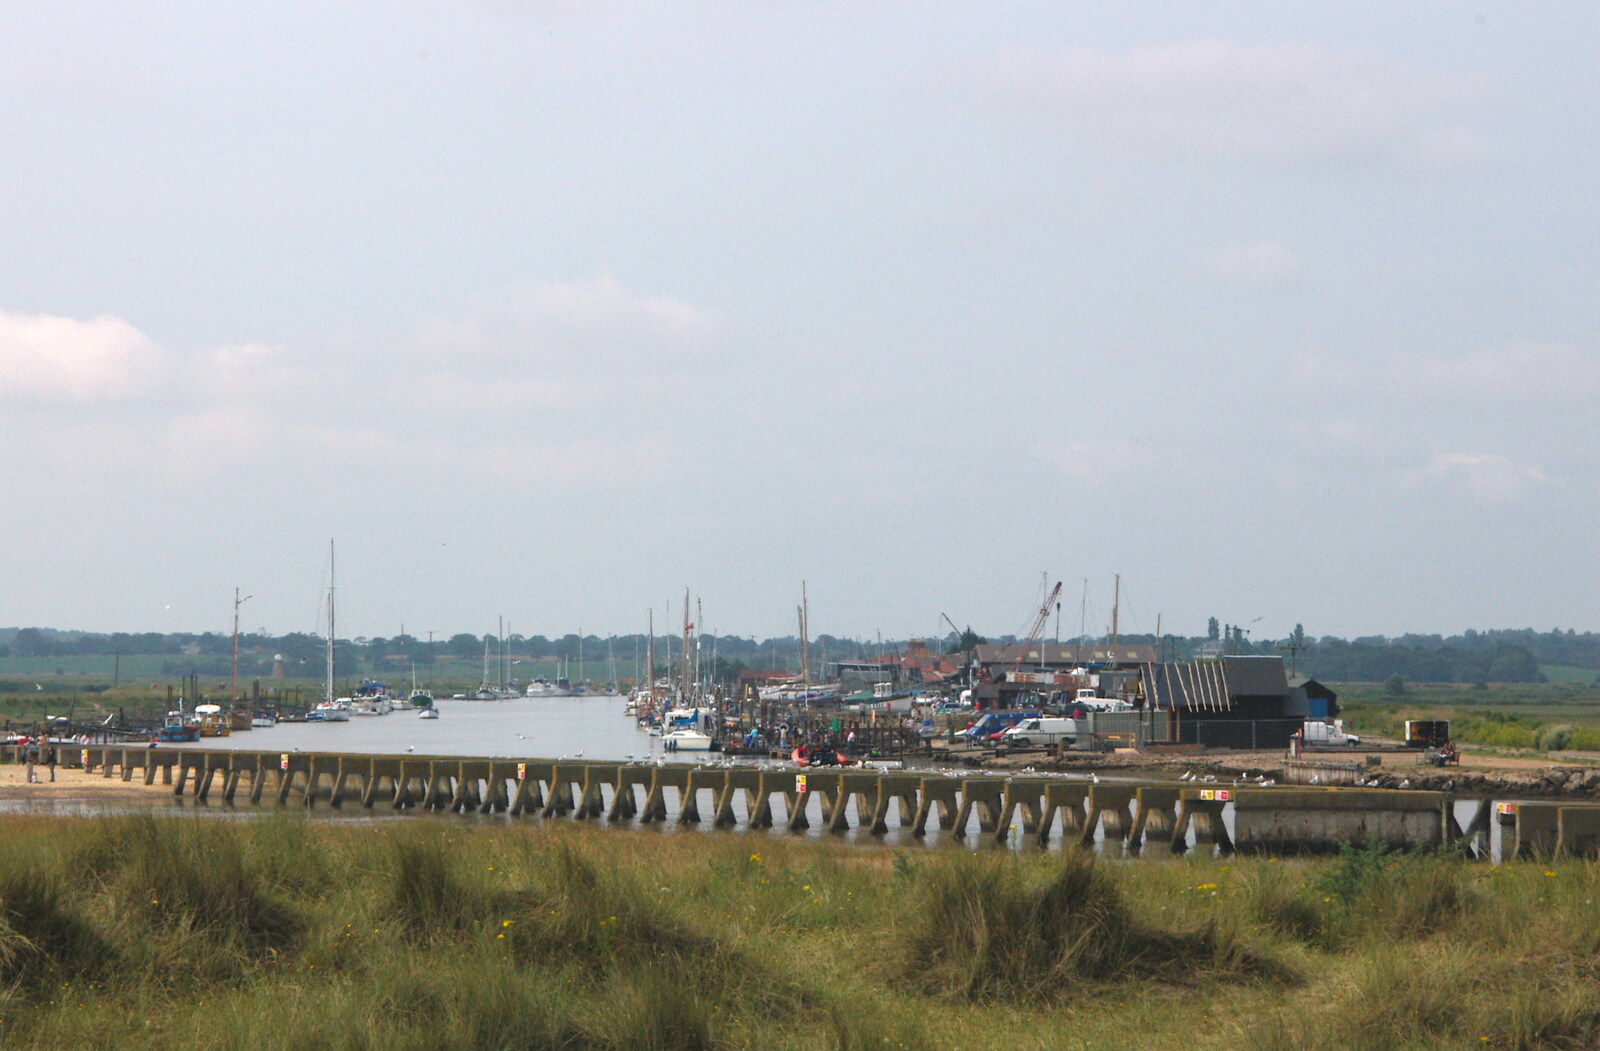 Looking up to Blackshore in Southwold from The BSCC Charity Bike Ride, Walberswick, Suffolk - 9th July 2005